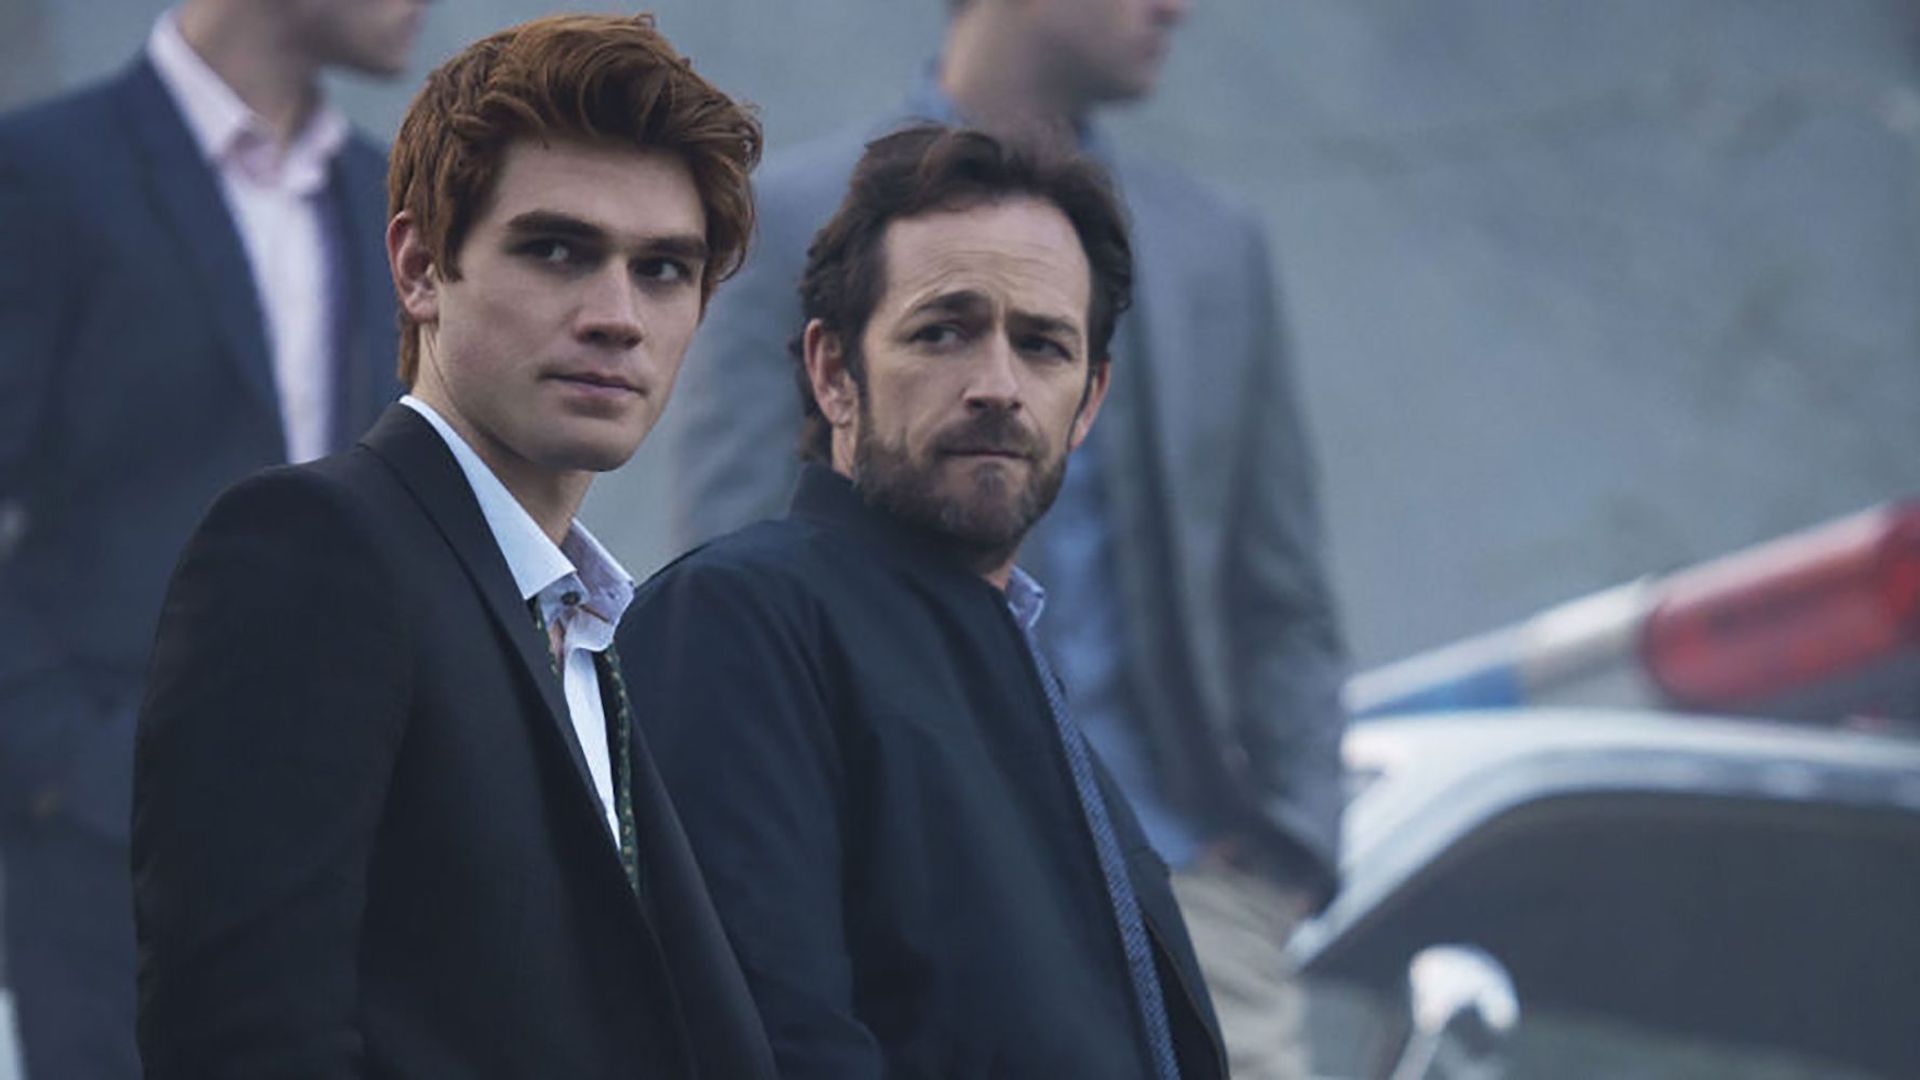 Archie Andrews and his dad